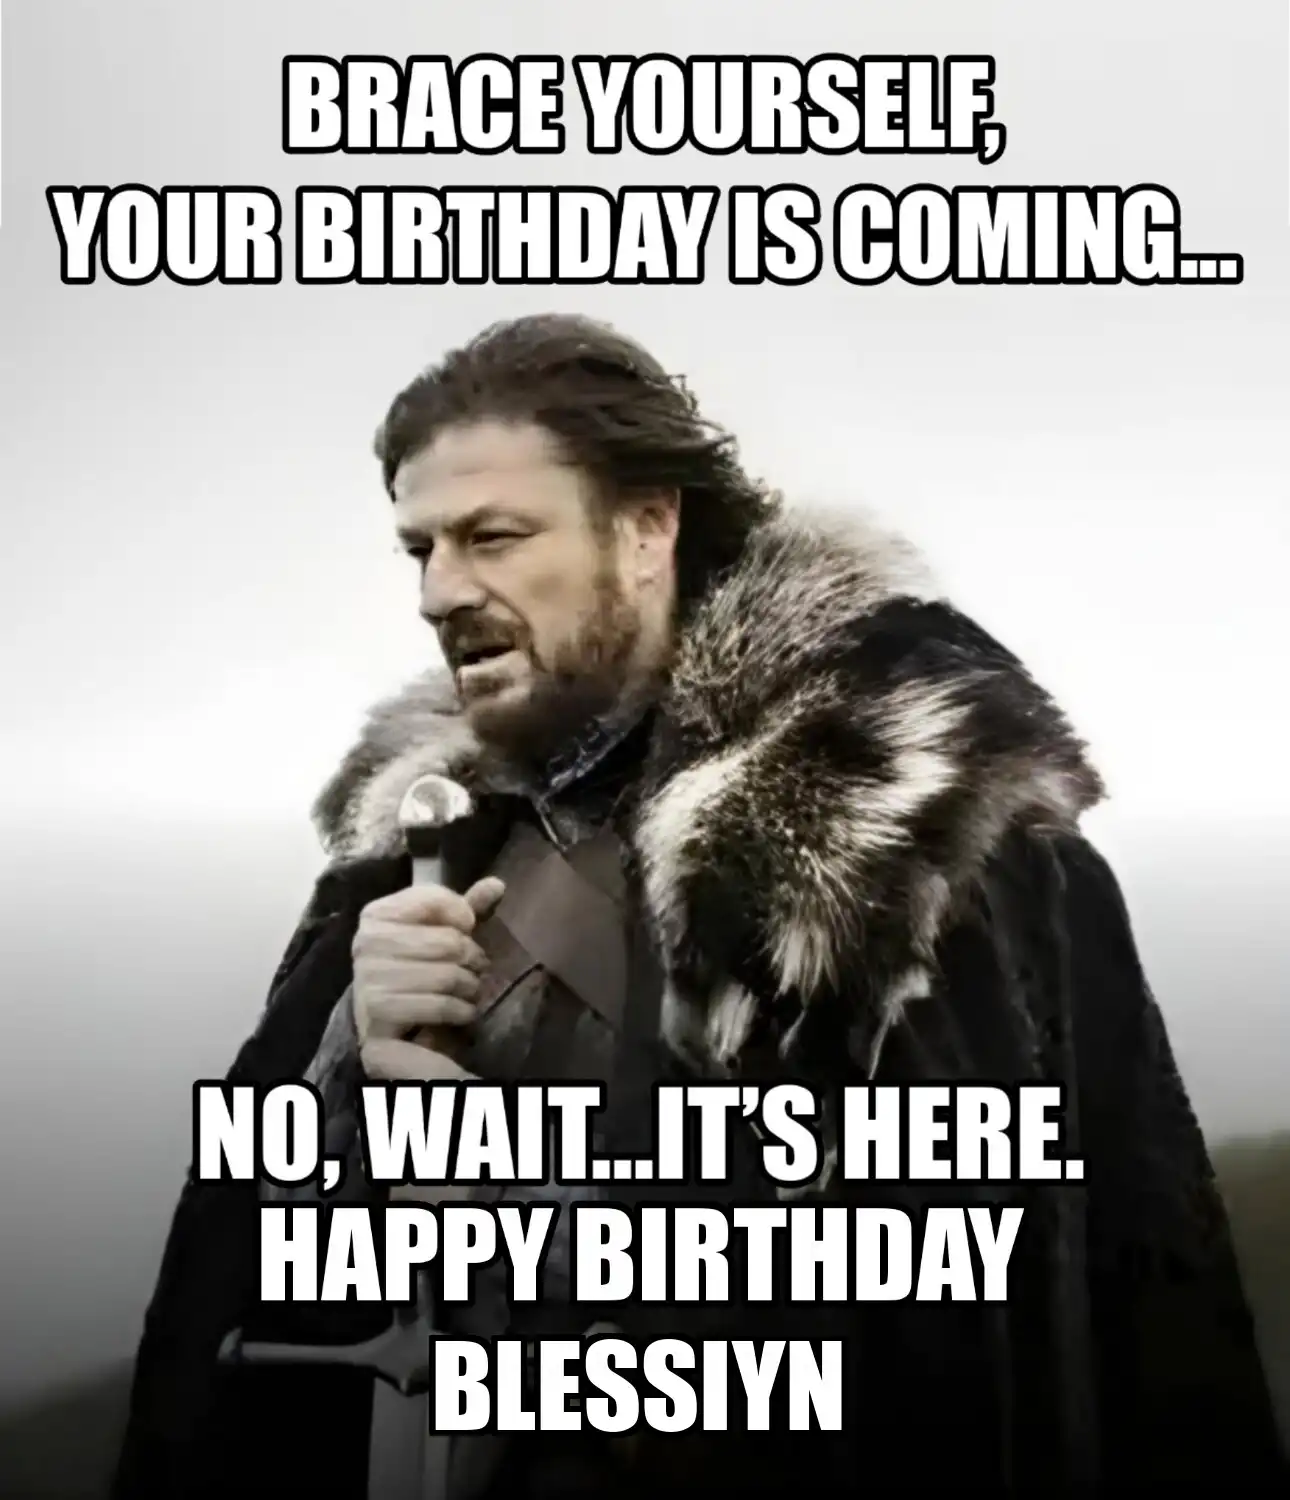 Happy Birthday Blessiyn Brace Yourself Your Birthday Is Coming Meme